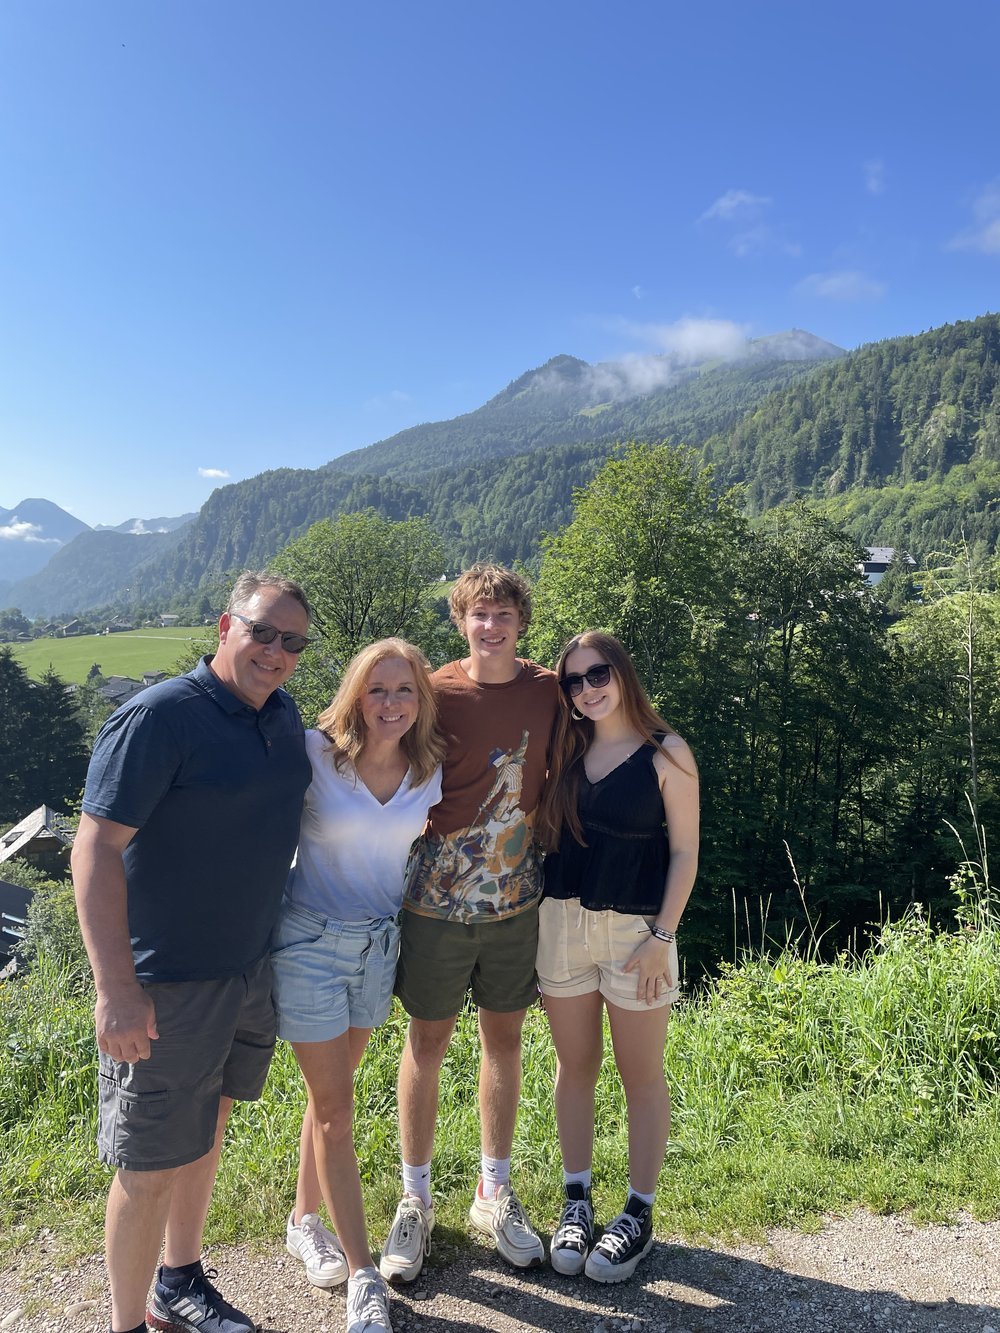 Christy S. and her family in Austria